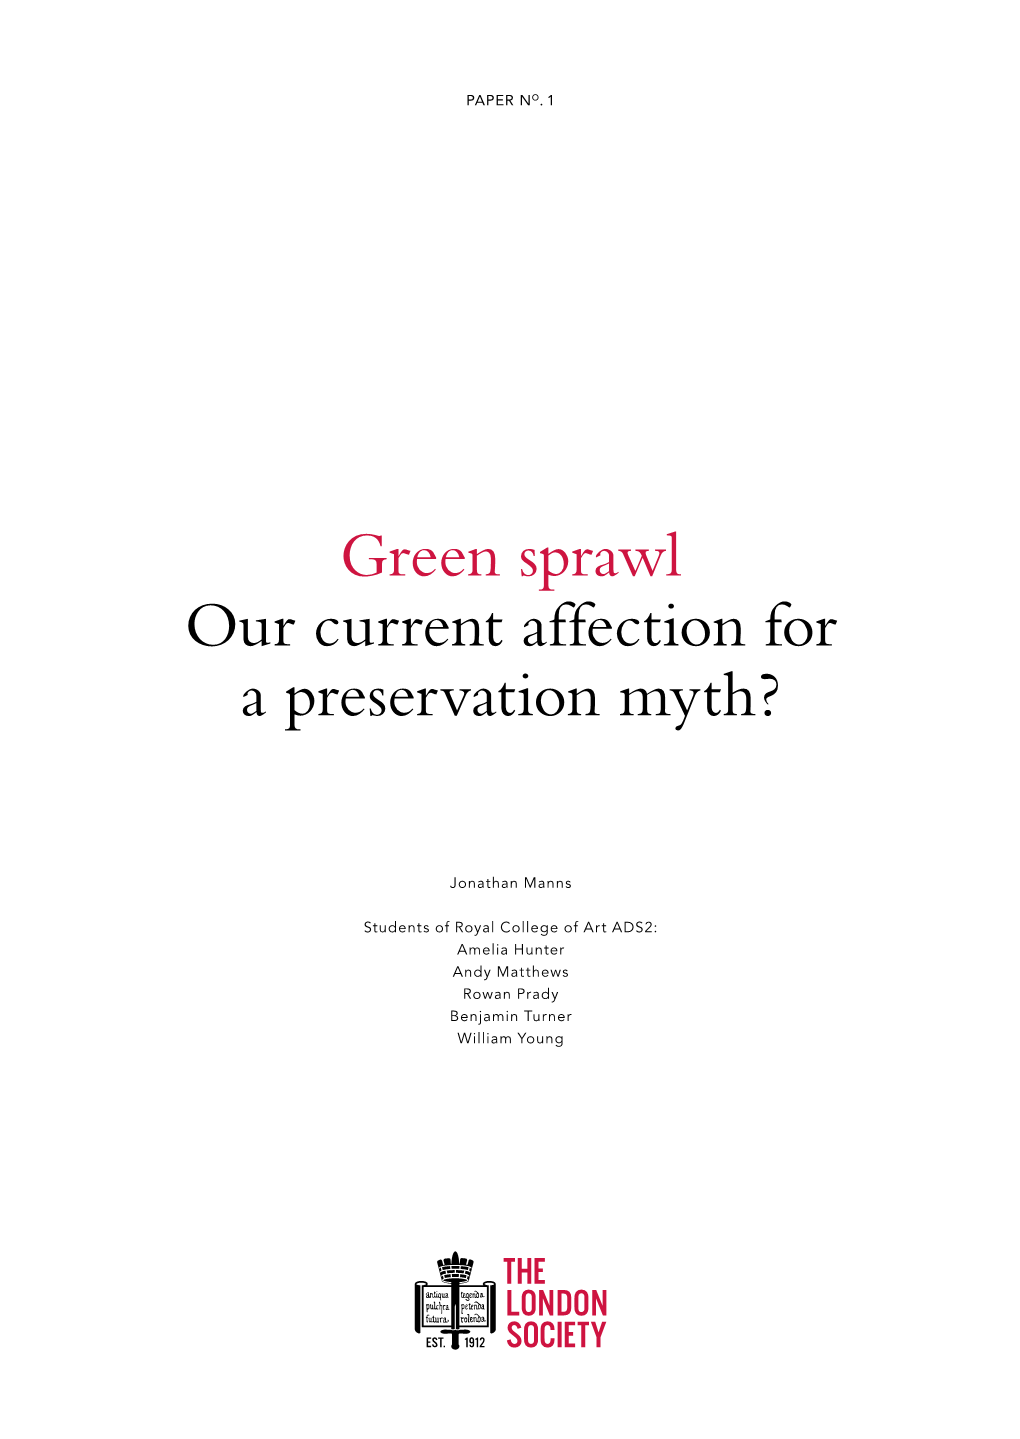 Green Sprawl Our Current Affection for a Preservation Myth?